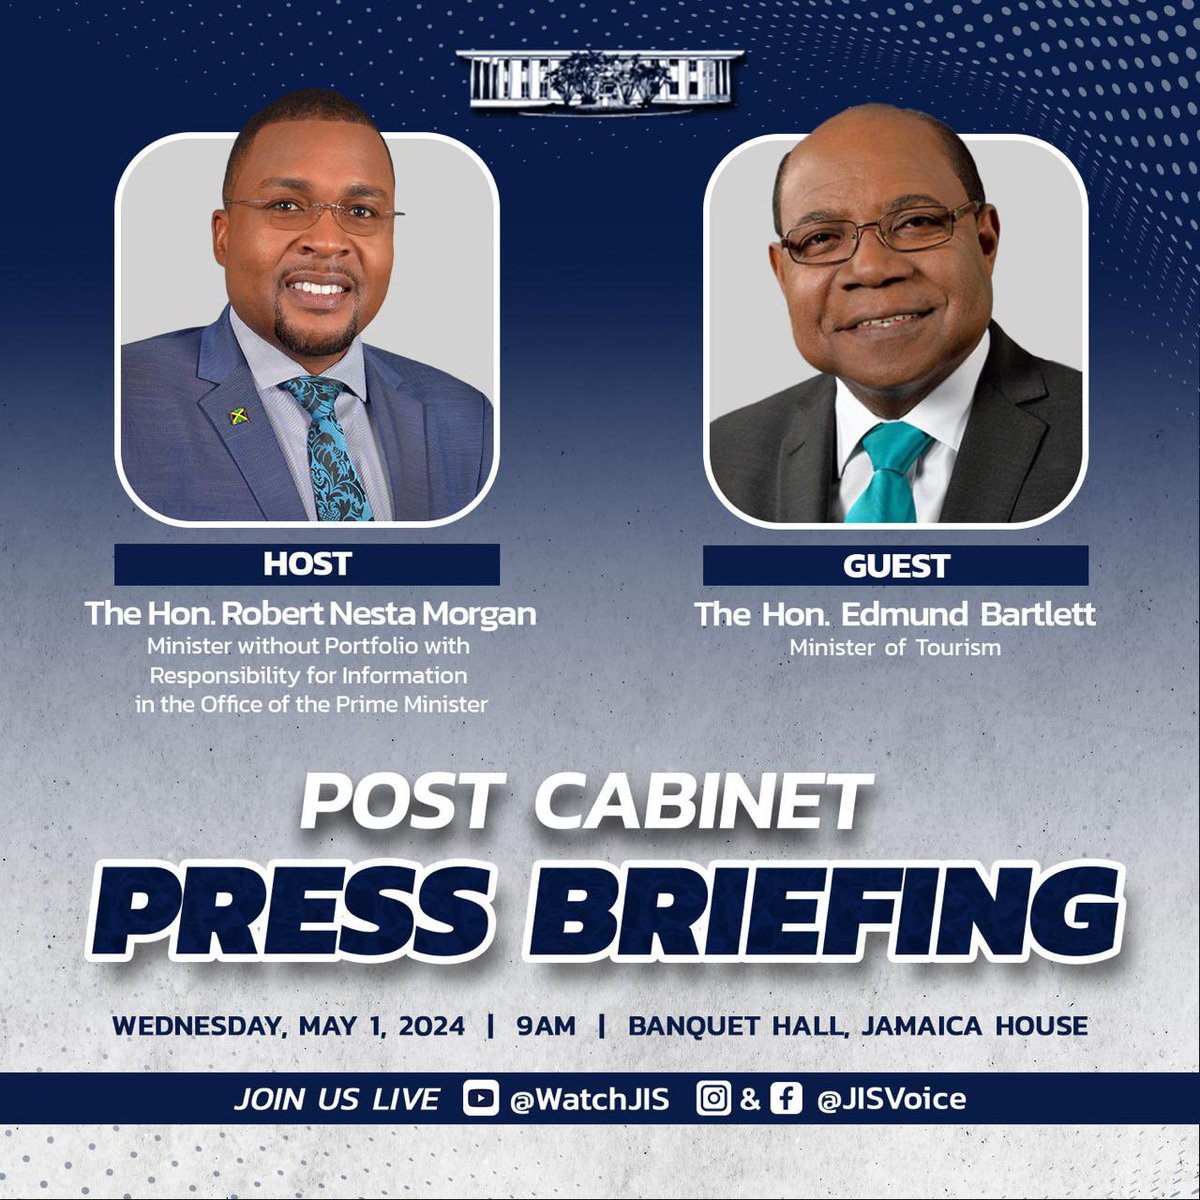 Join us tomorrow at 9:00am for POST CABINET PRESS BRIEFING Minister of Tourism, the Honourable Edmund Bartlett will join me for the Briefing. STREAMING LIVE ON: @pbcjamaica @jisvoice - Facebook and YouTube @andrewholness on IG and Facebook RobertNestaMorgan - Facebook…